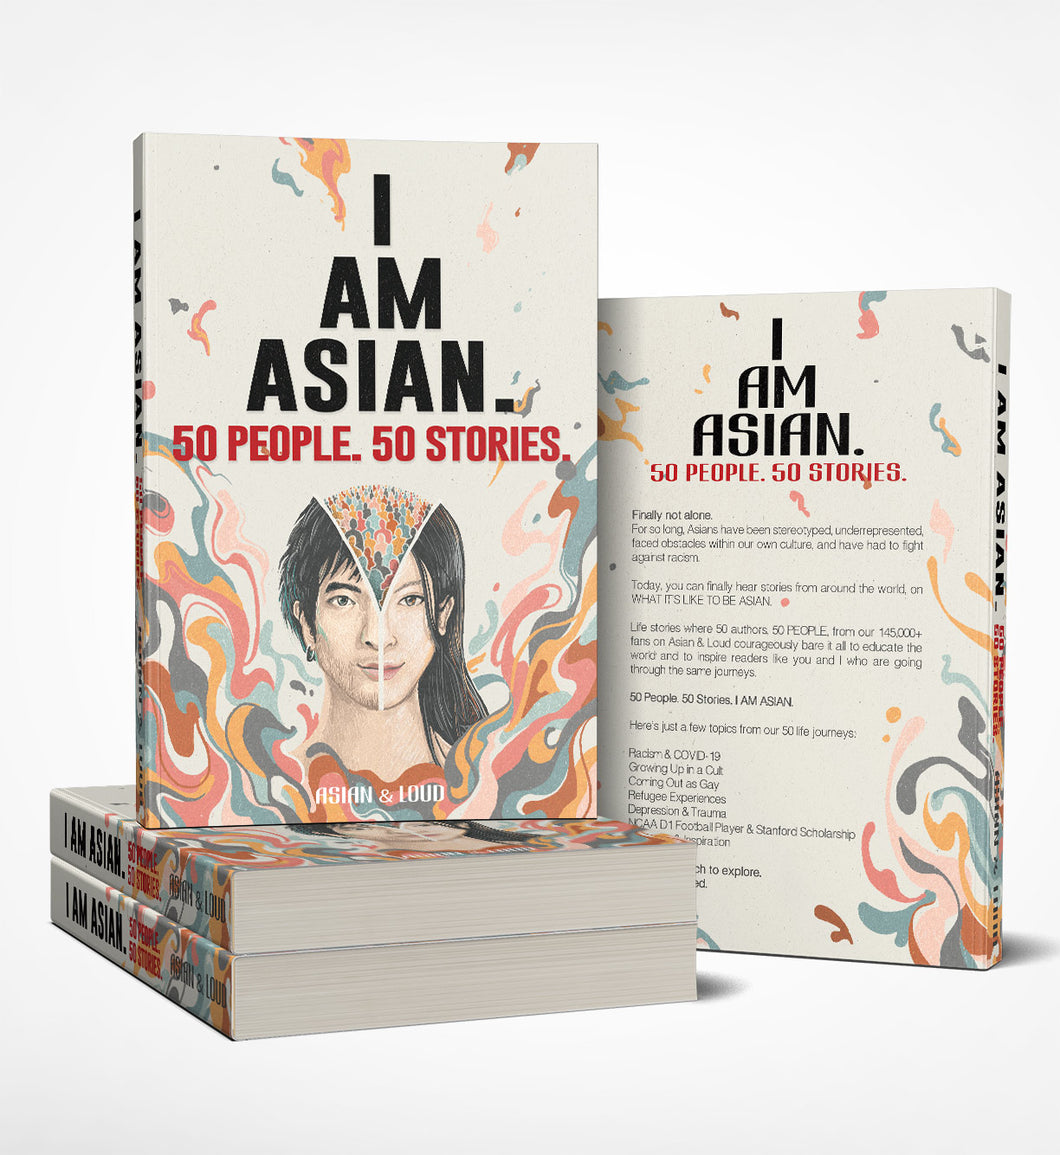 50 People. 50 Stories. I AM ASIAN. (eBook)